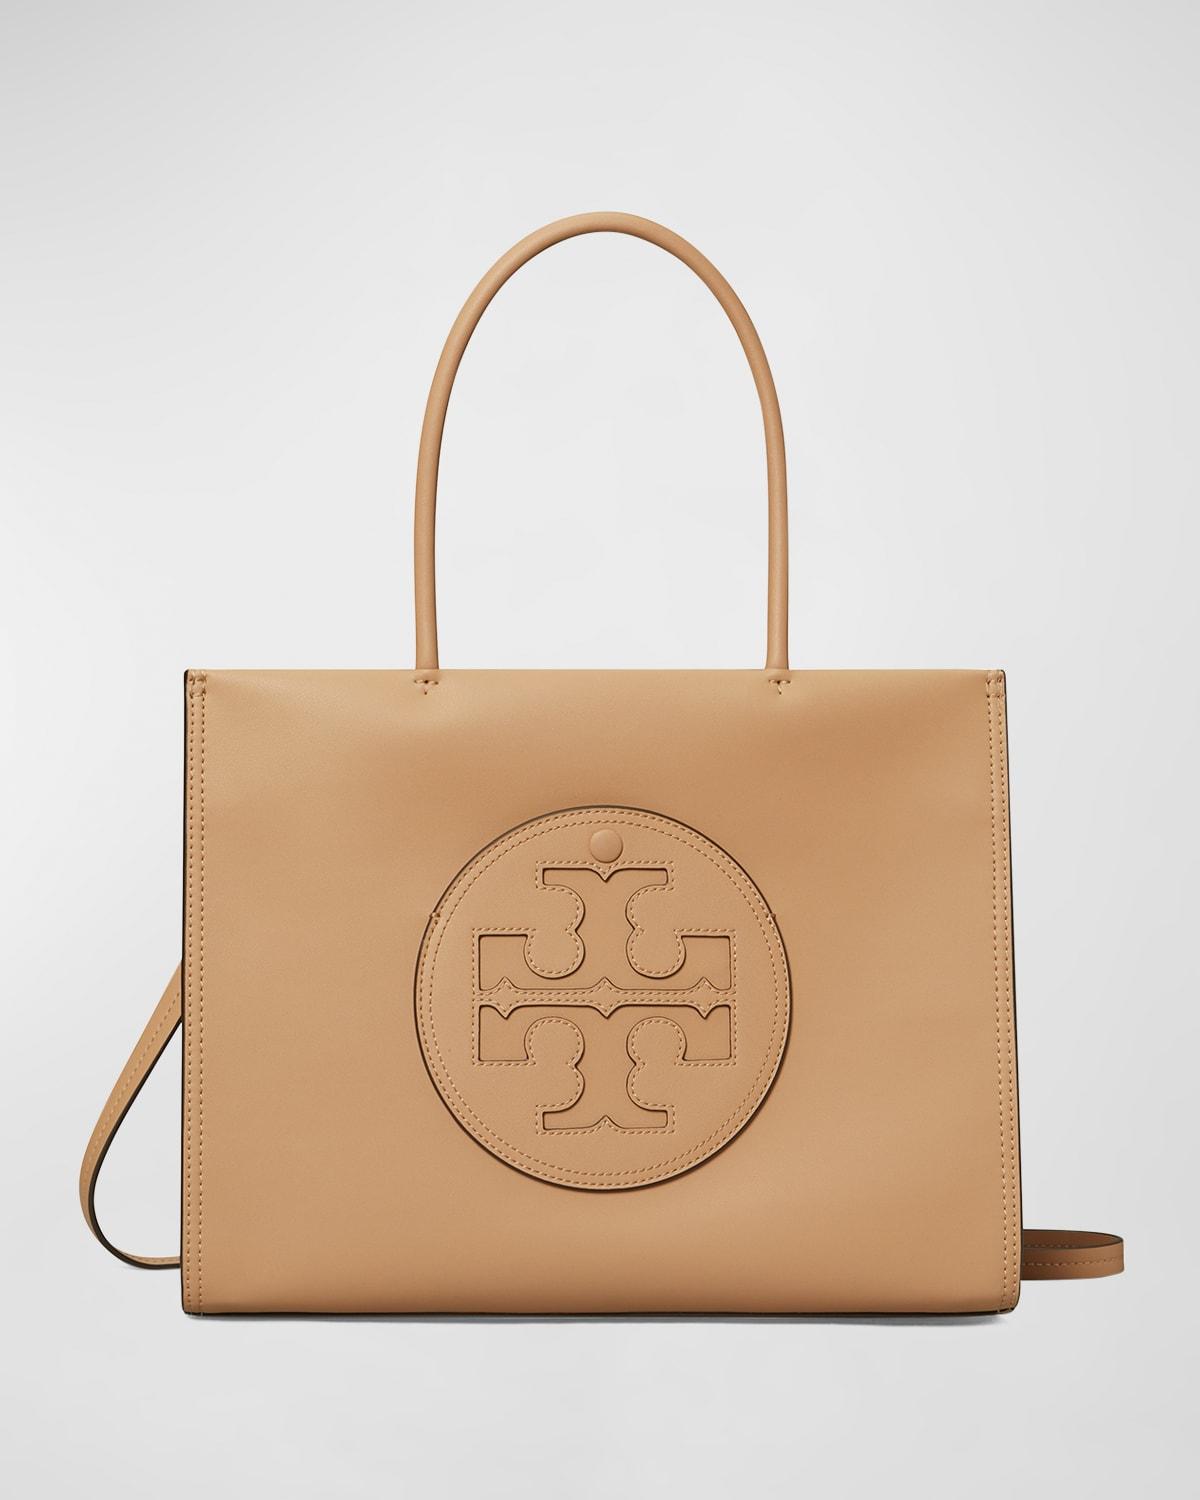 Tory Burch Ella Bio Small Faux-leather Tote Bag in Natural | Lyst